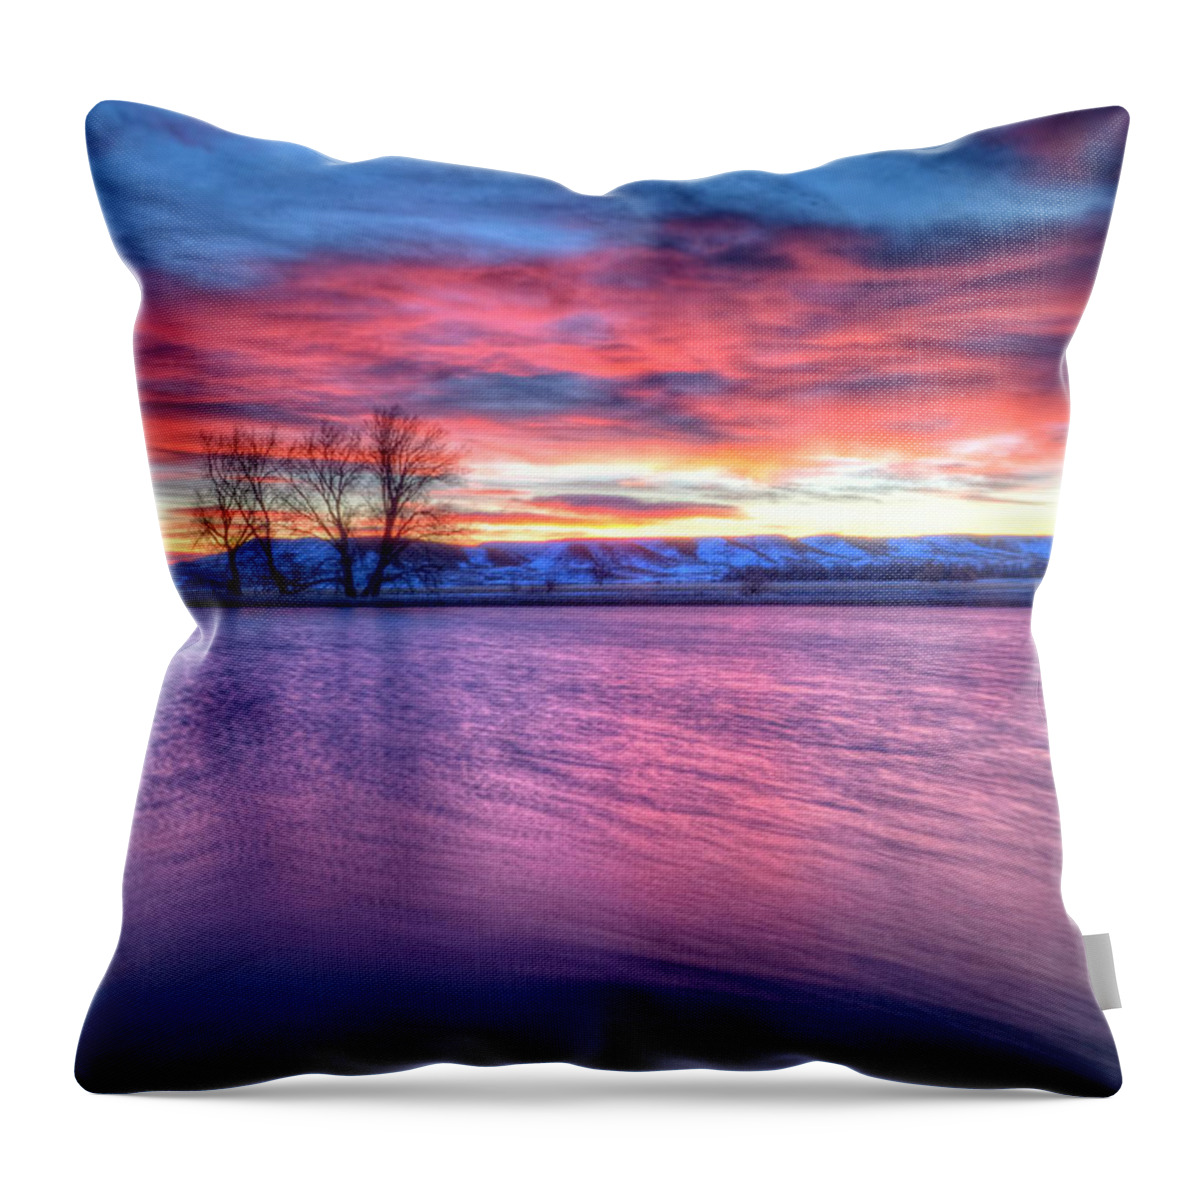 Sunrise Throw Pillow featuring the photograph Red Dawn by Fiskr Larsen